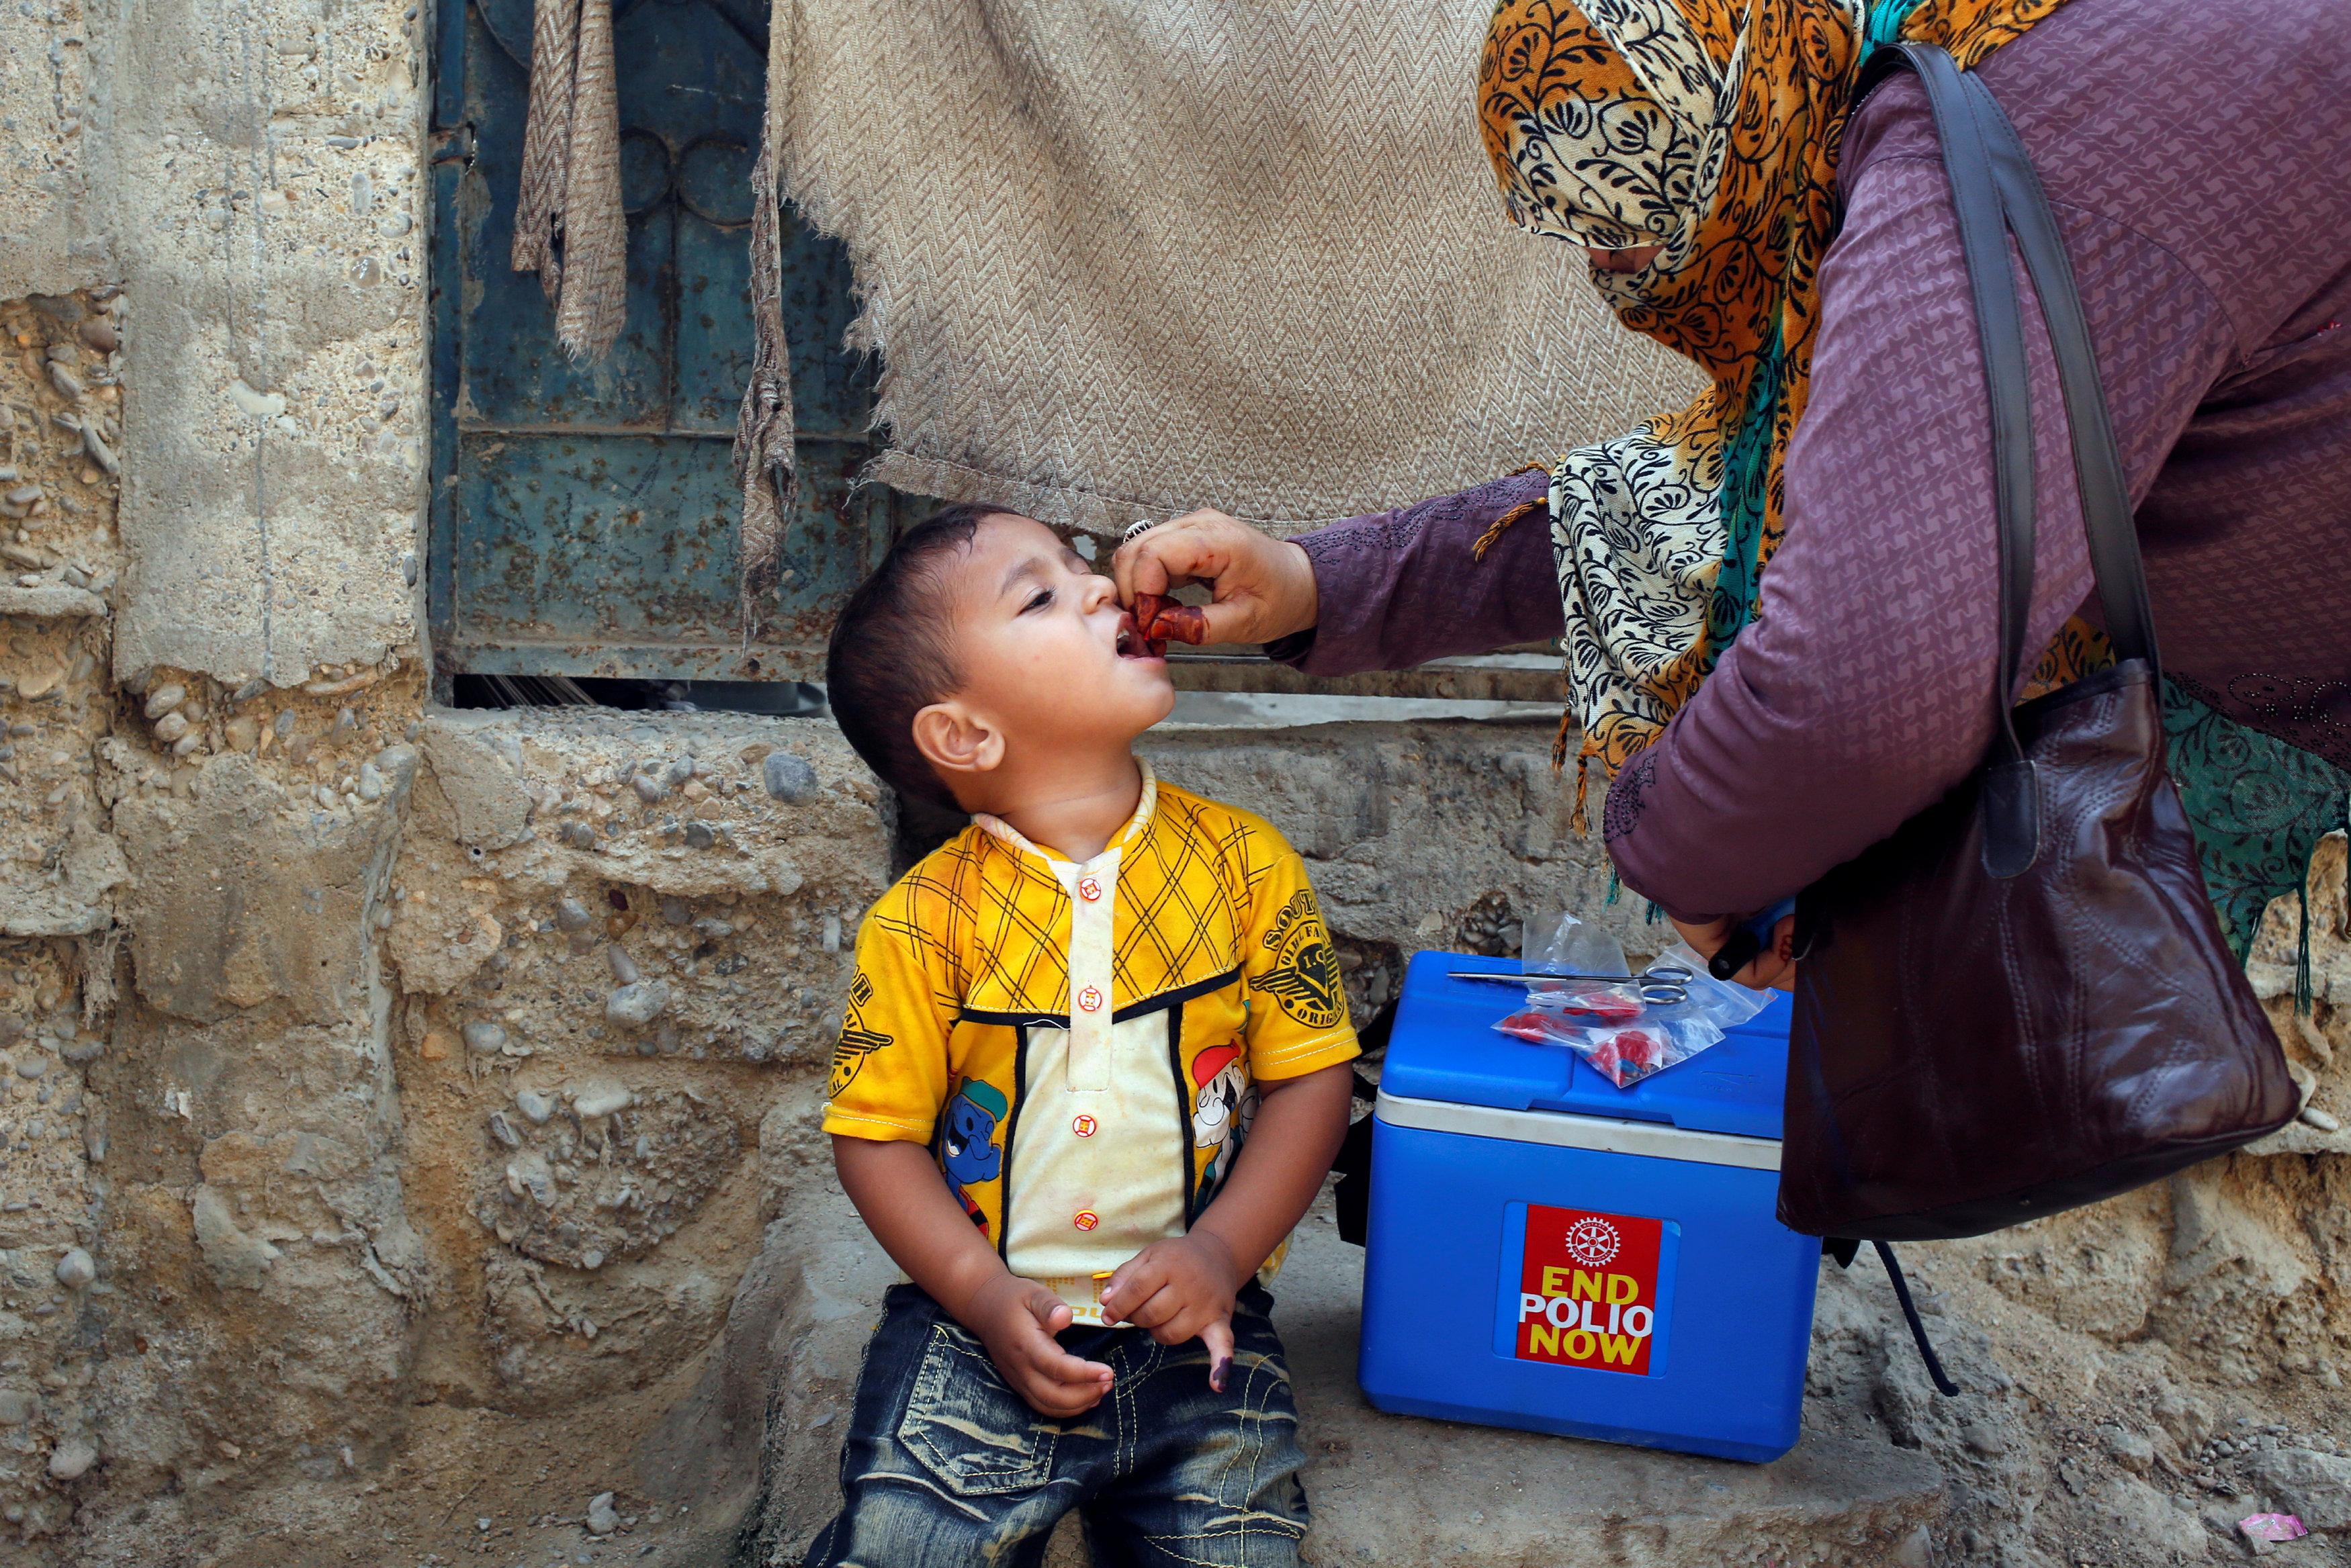 pm 039 s adviser on polio eradication says campaign was a five day affair and completed on schedule photo reuters